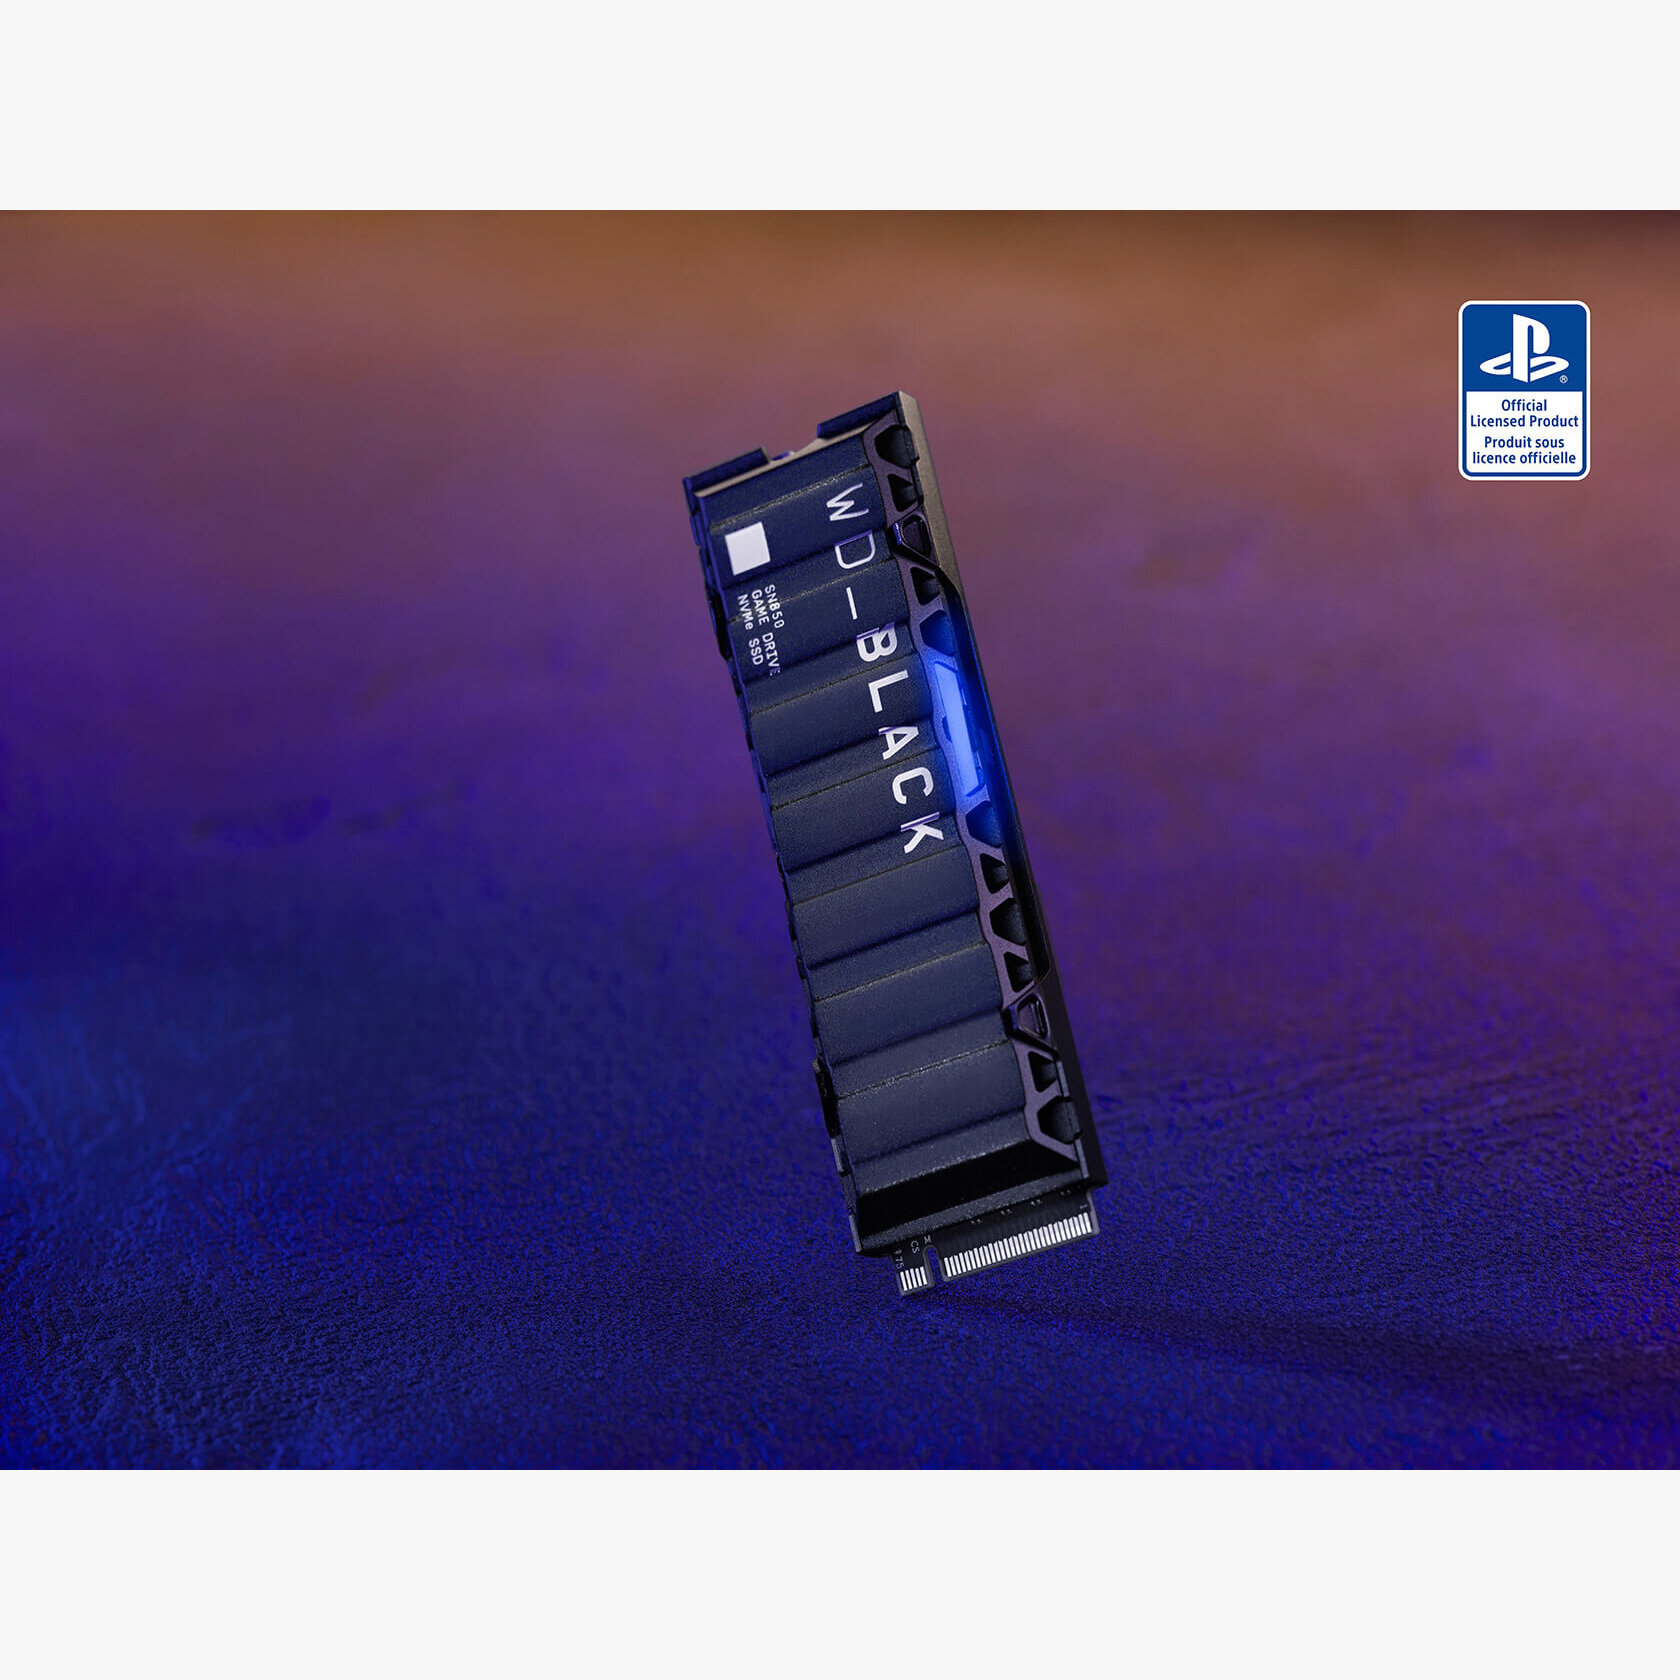 Deal Alert: The PS5 Officially Licensed WD Black SN850P 2TB SSD Is At Its  Lowest Price Ever - IGN